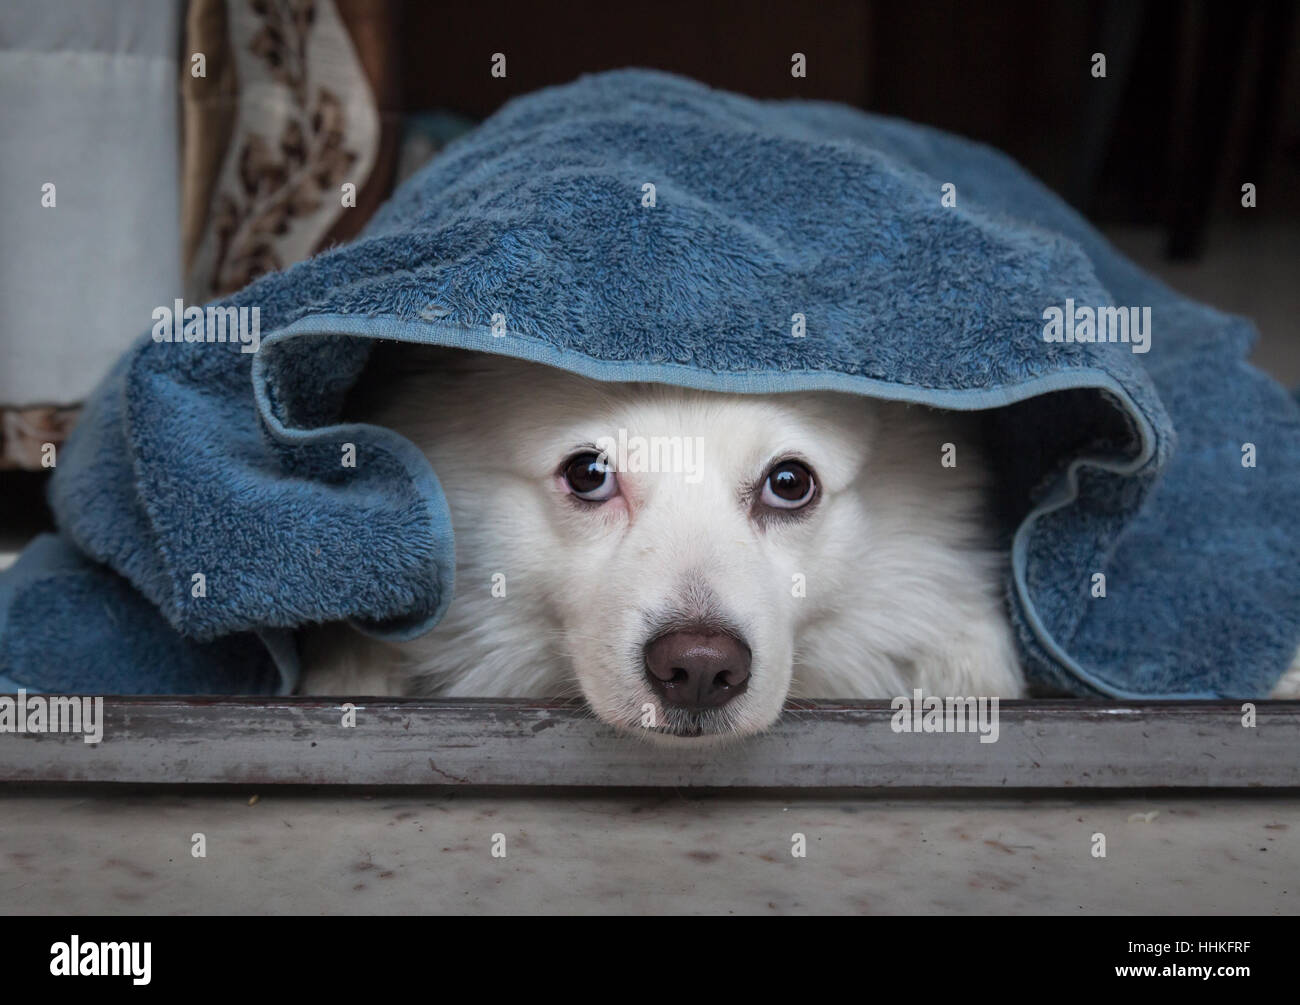 Cute white German Spitz dog lying inside a blue blanket with only the face peeping out. Close up dog portrait. Stock Photo